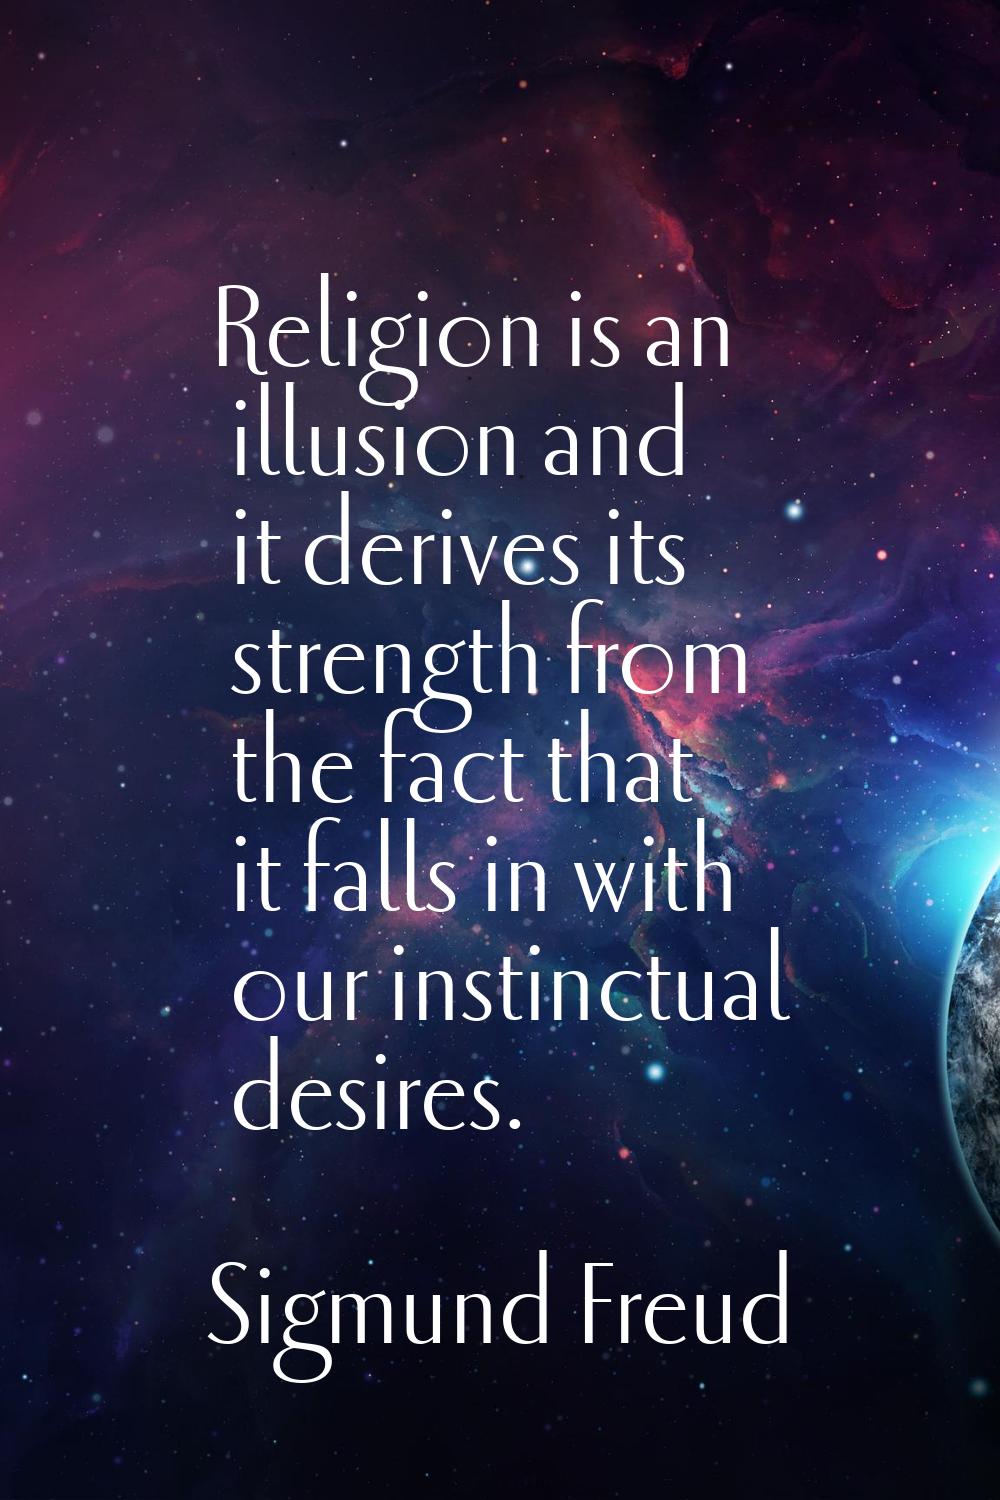 Religion is an illusion and it derives its strength from the fact that it falls in with our instinc